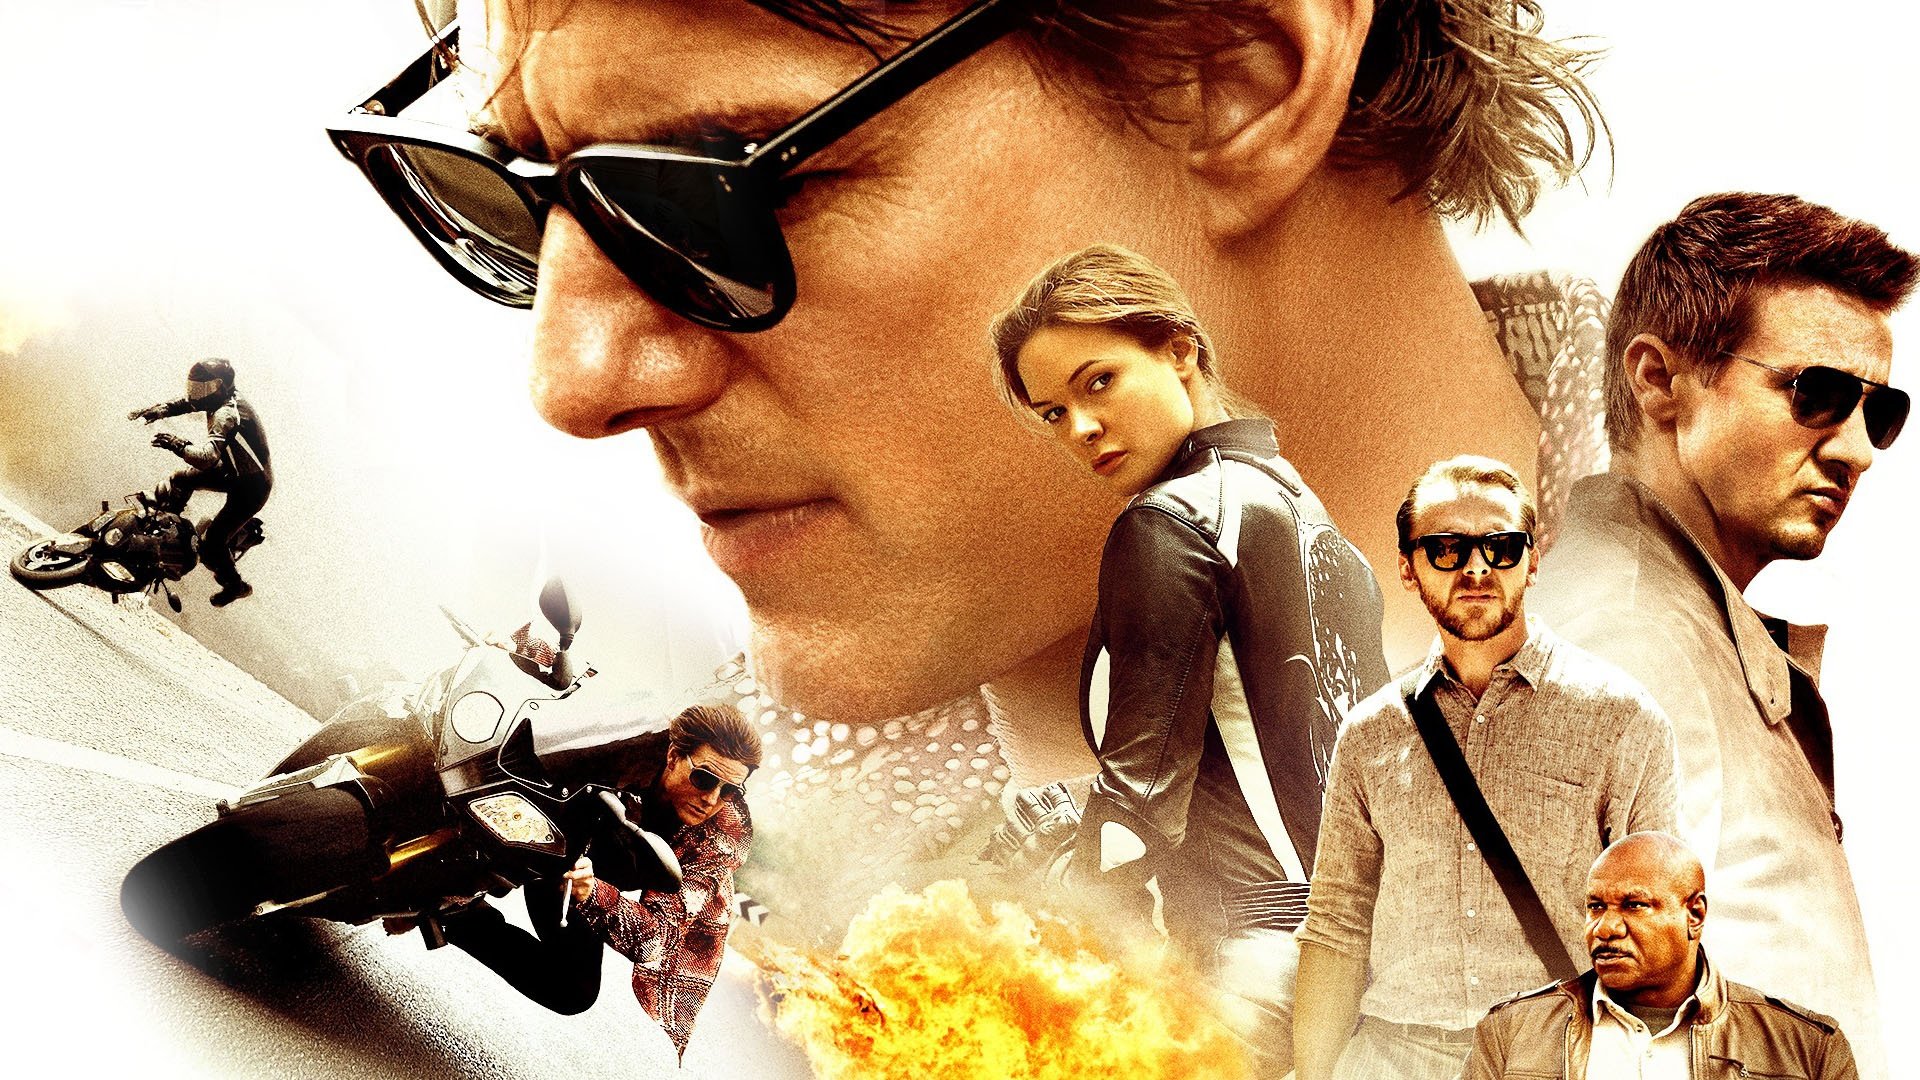 mission, Impossible, Movie, Film, 1mirn, Action, Cruise, Fighting